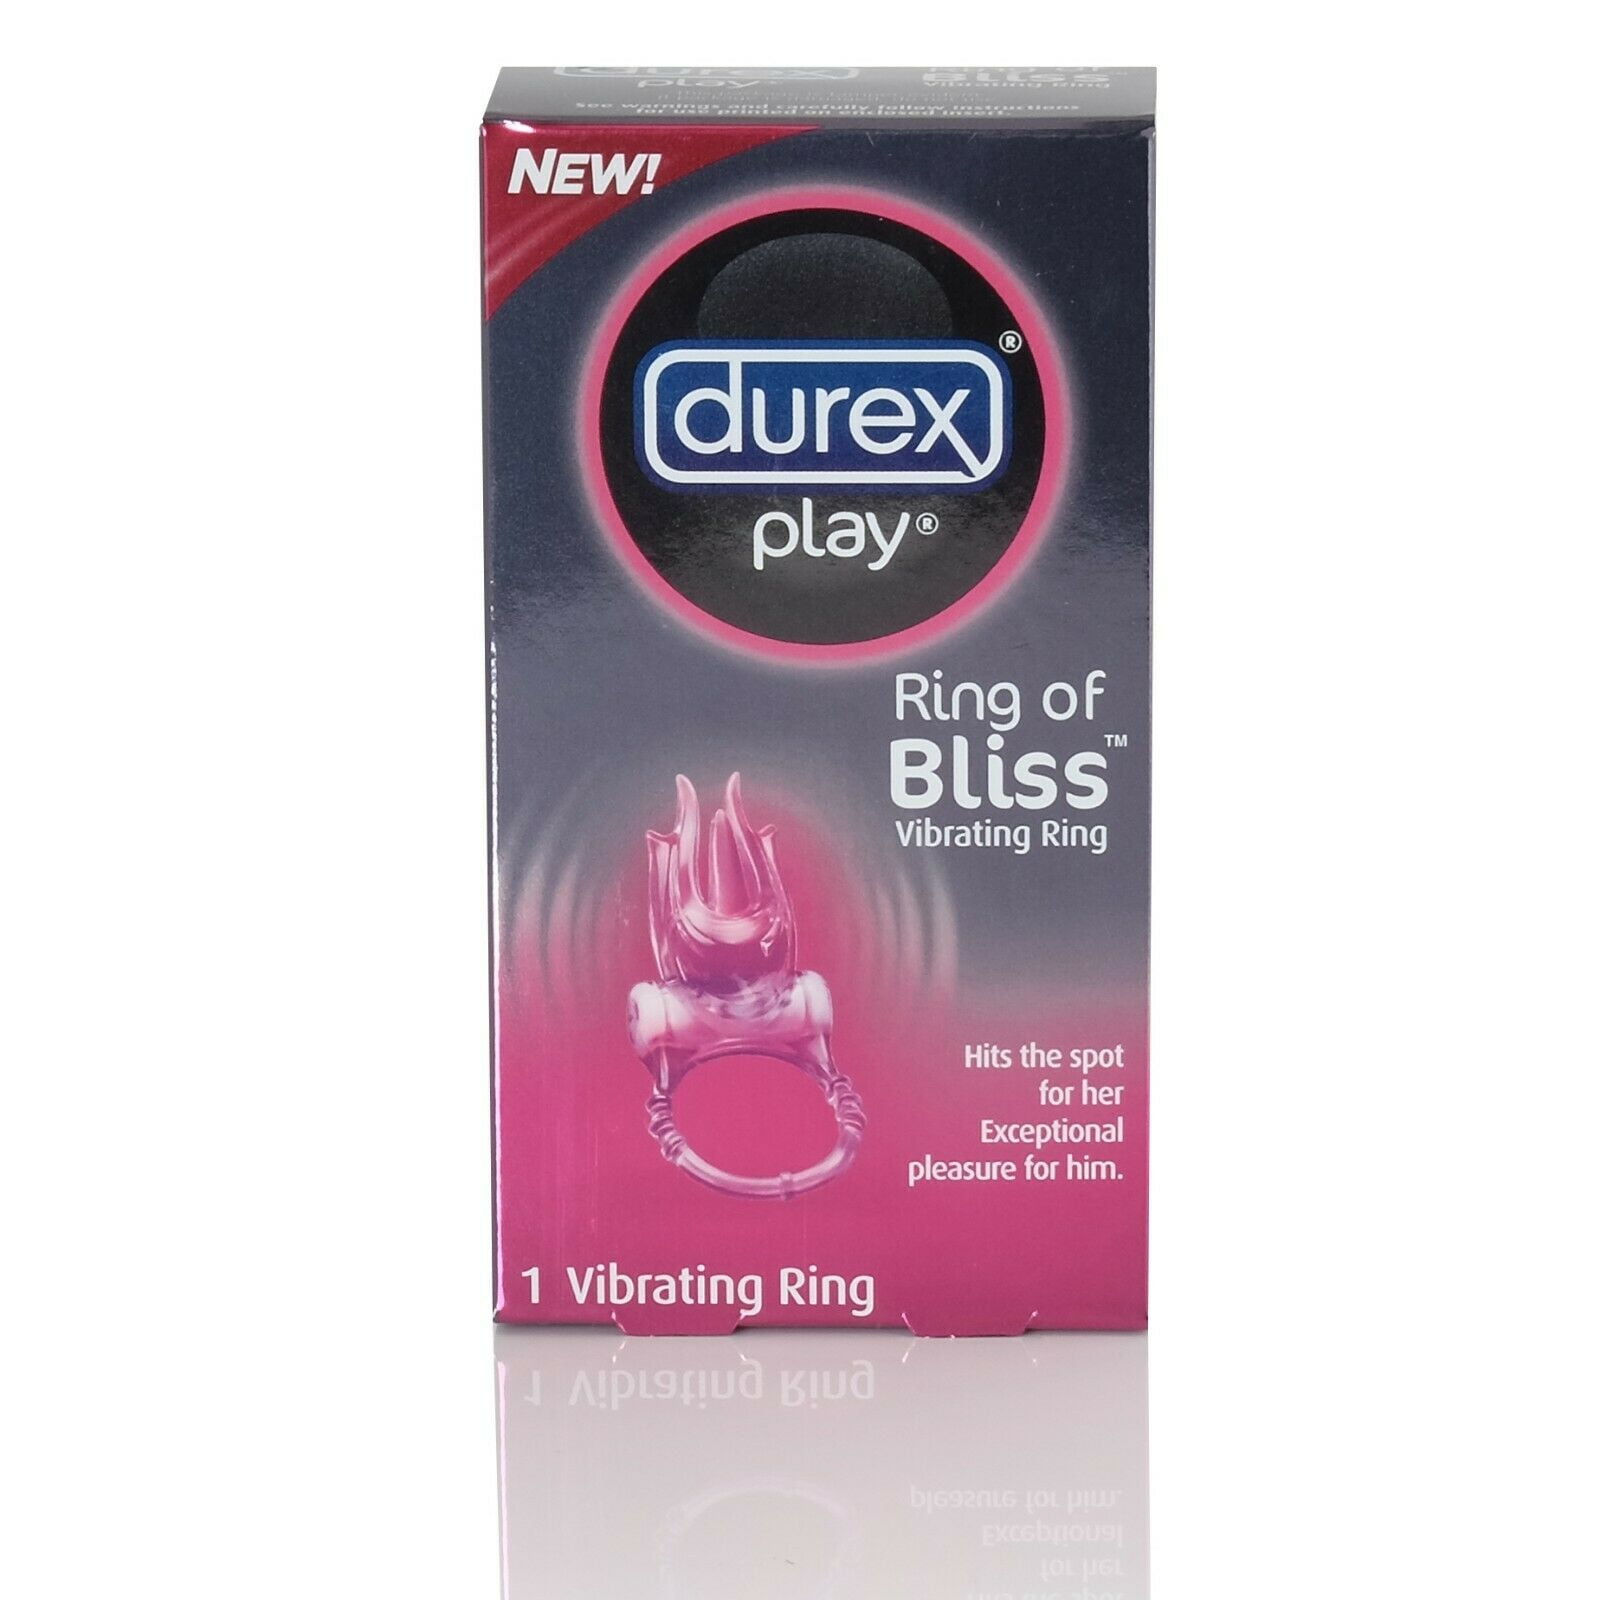 2 Durex Play Ring of Bliss Vibrating Ring, 1 Count India | Ubuy